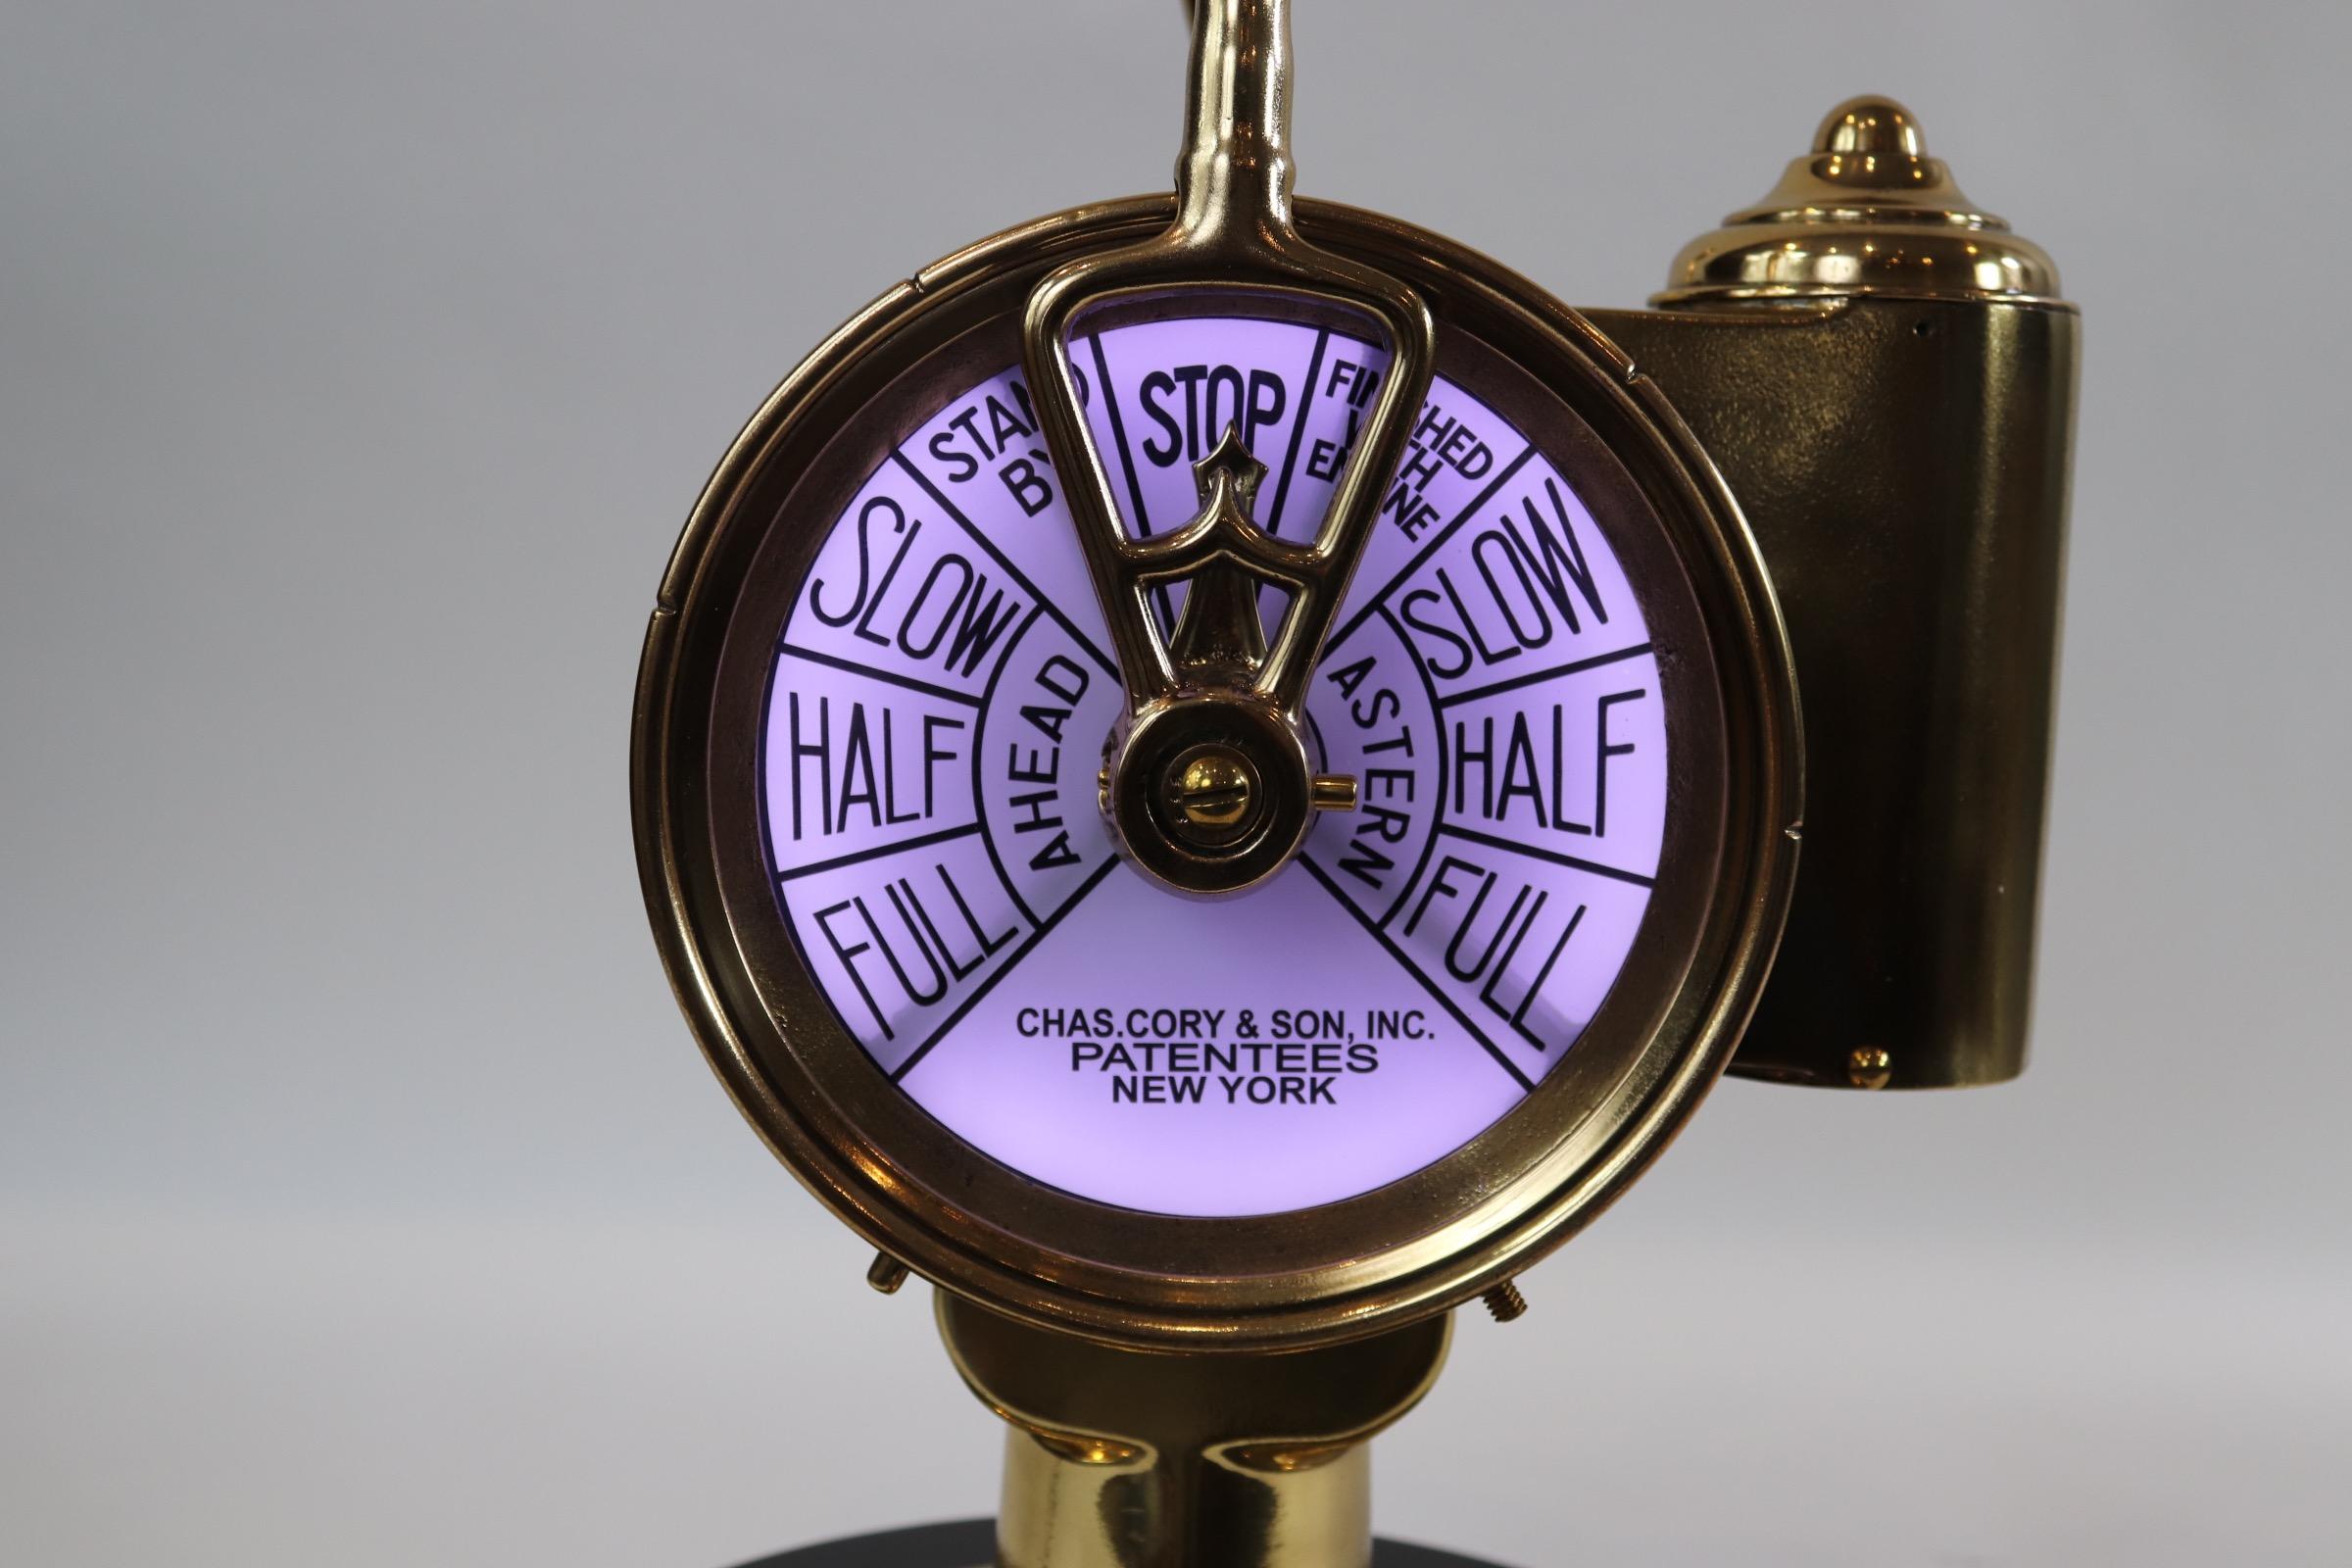 Solid brass ships engine order telegraph with faceplates from Charles Cory & Son, Inc., New York. With modern wiring for home display. Mounted to a thick wood base with rich dark finish. Weight is 28 pounds.